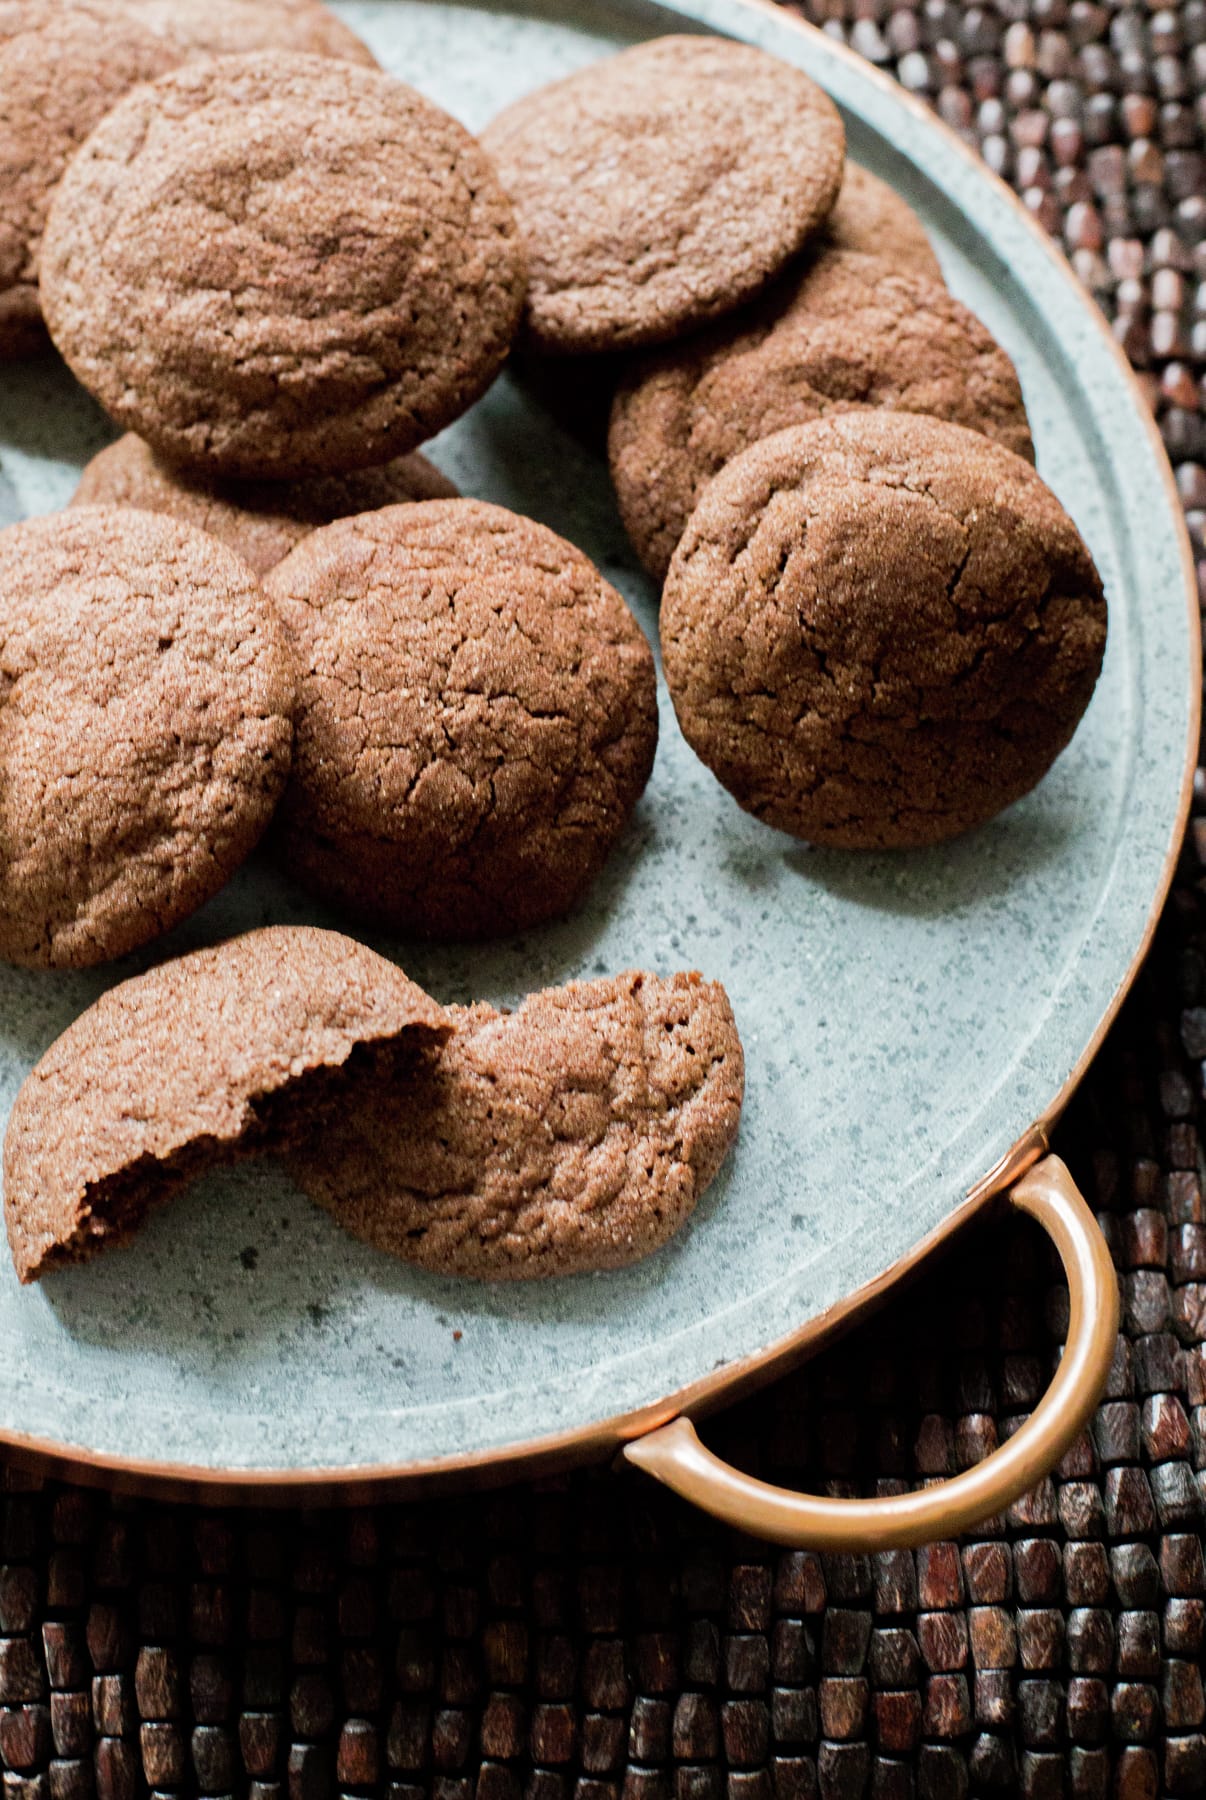 Chocolate Cookies with a touch of cinnamon